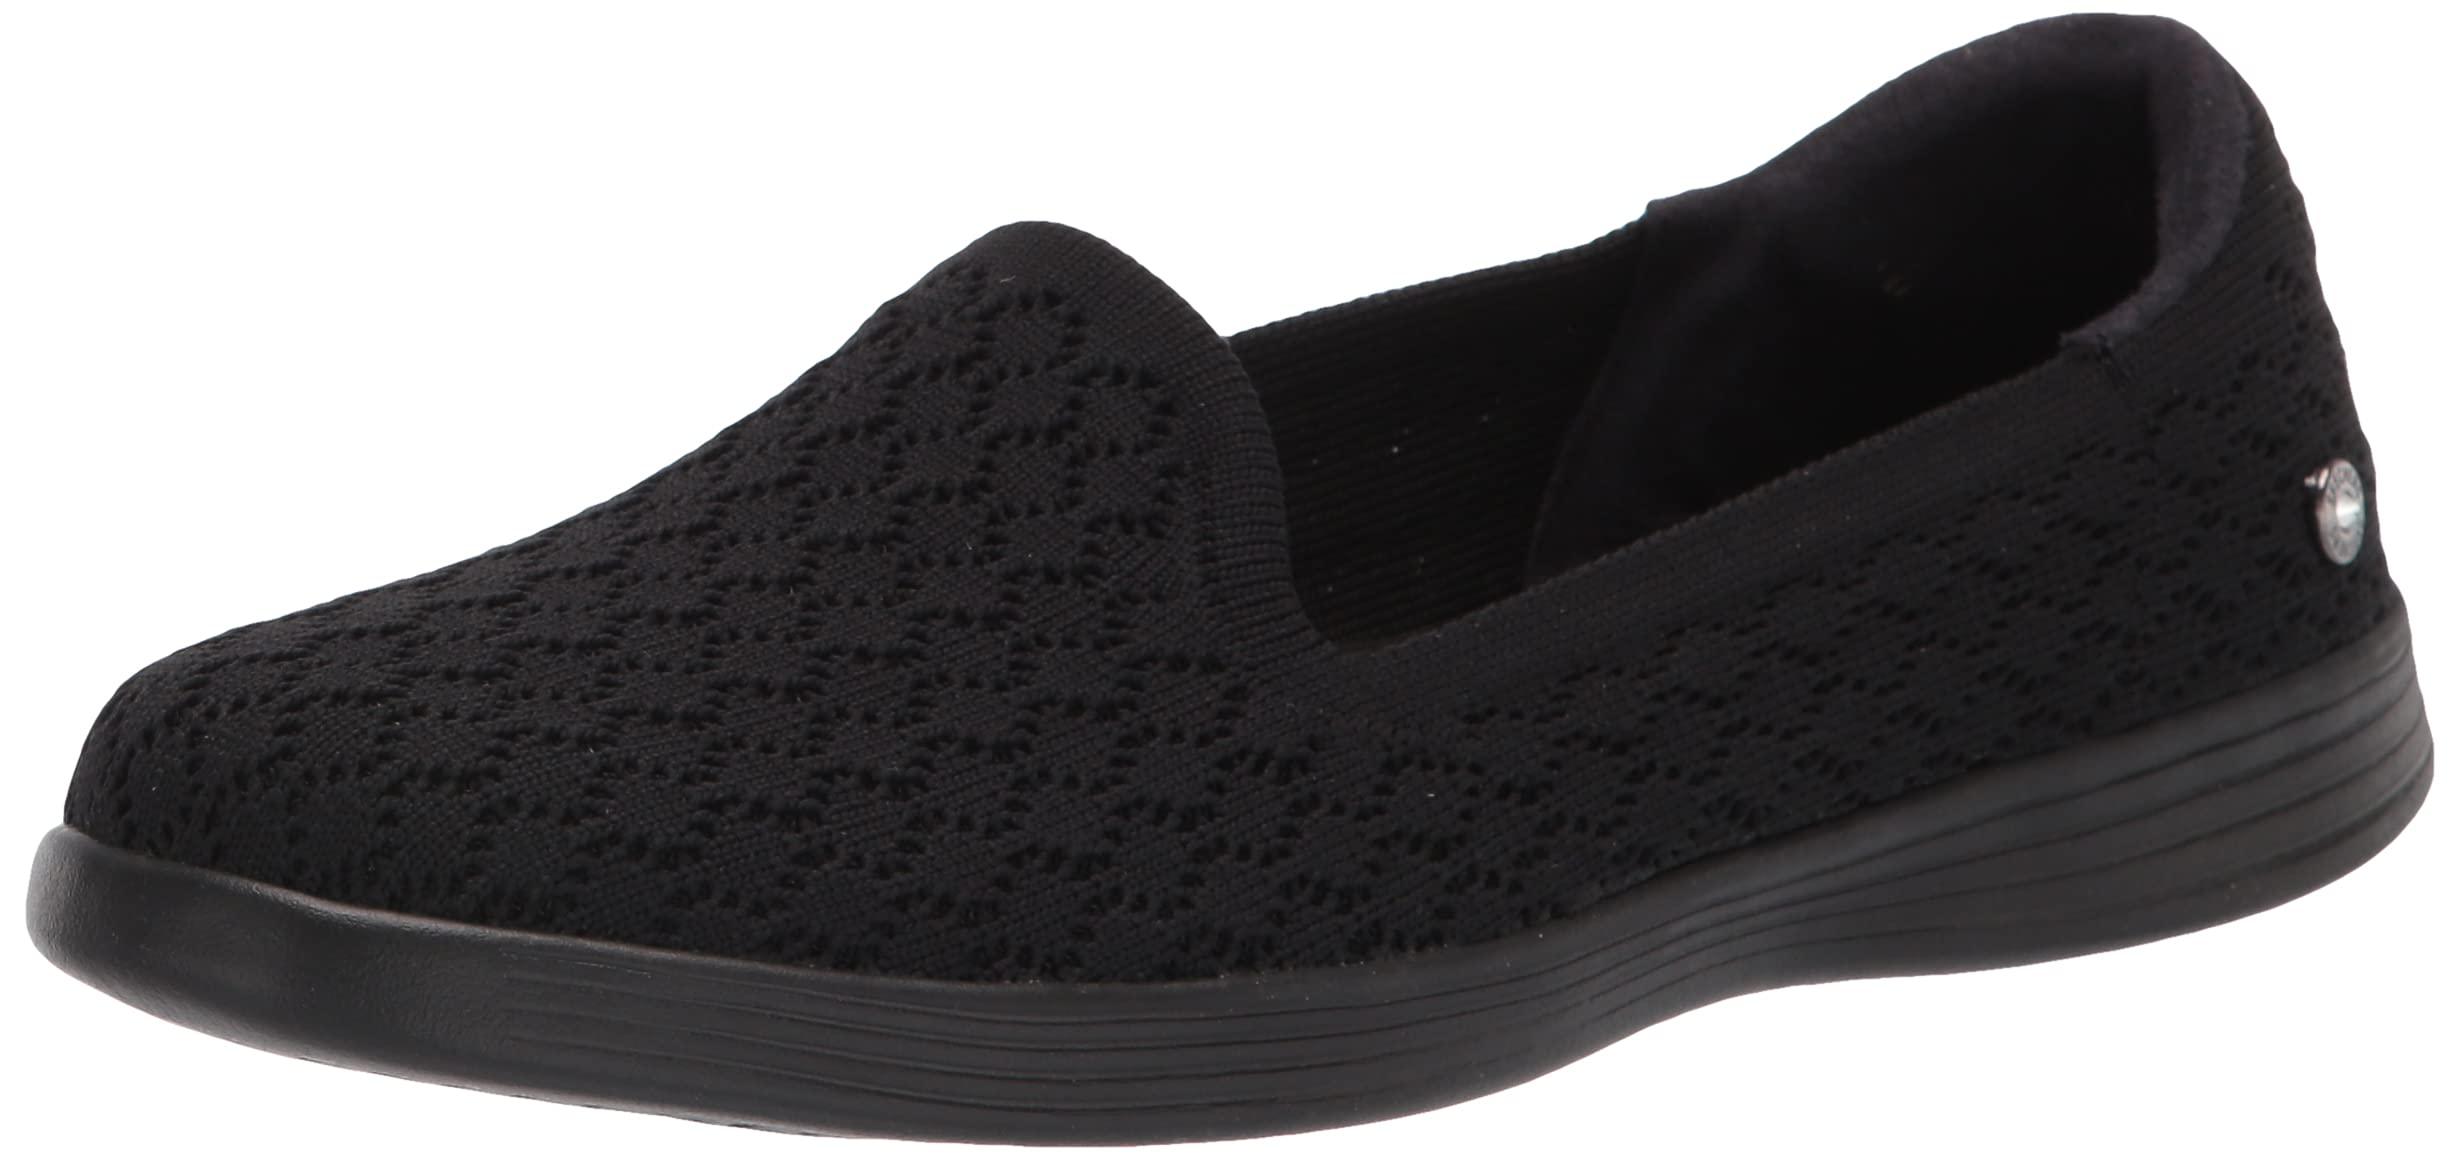 Skechers On-the-go Dreamy-donna Loafer Flat in Black - Save 55% - Lyst